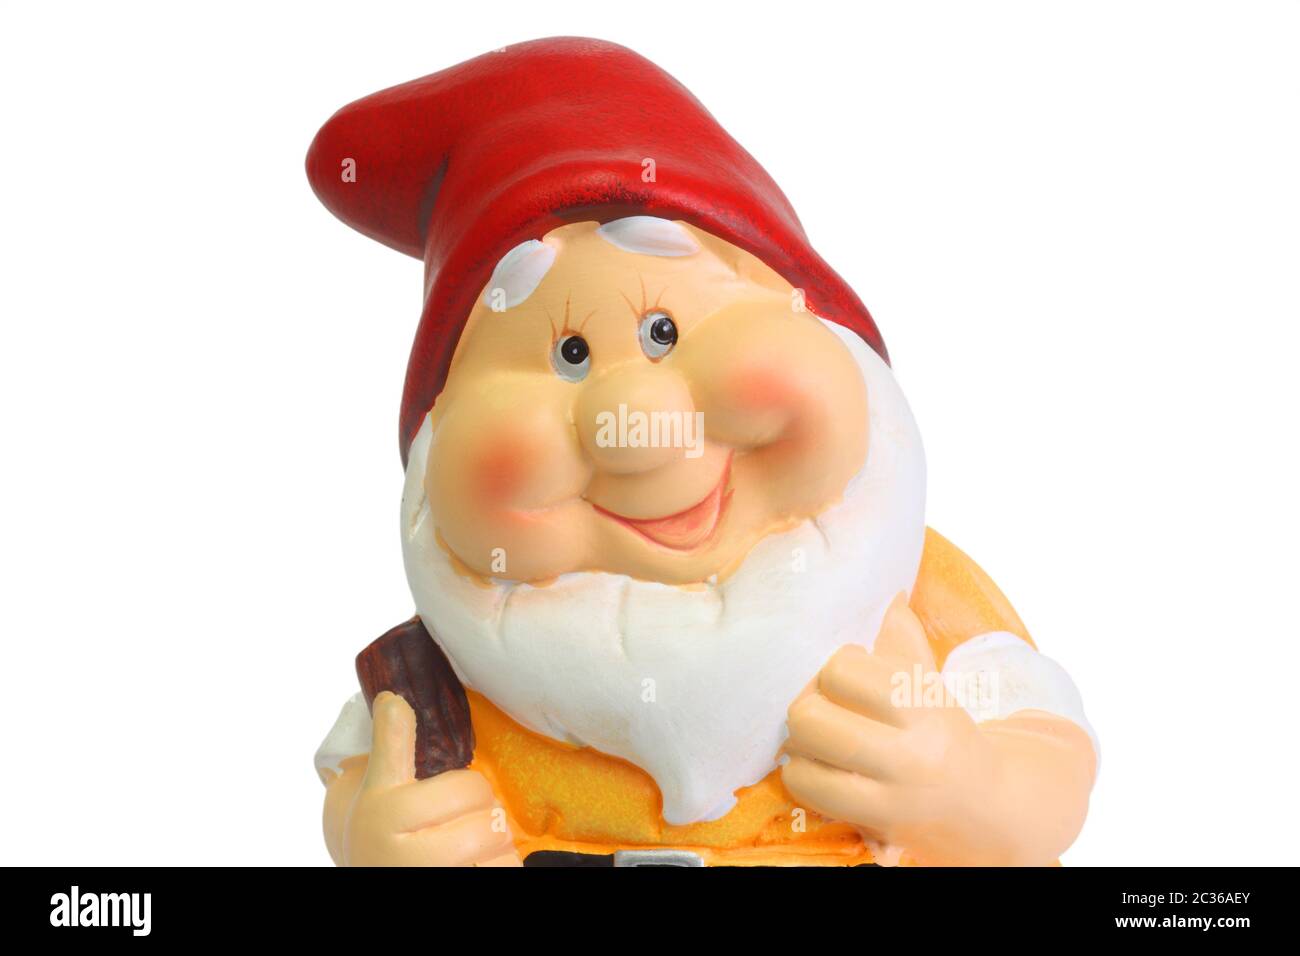 The Classic Garden Gnome Statue isolated on white background Stock Photo -  Alamy